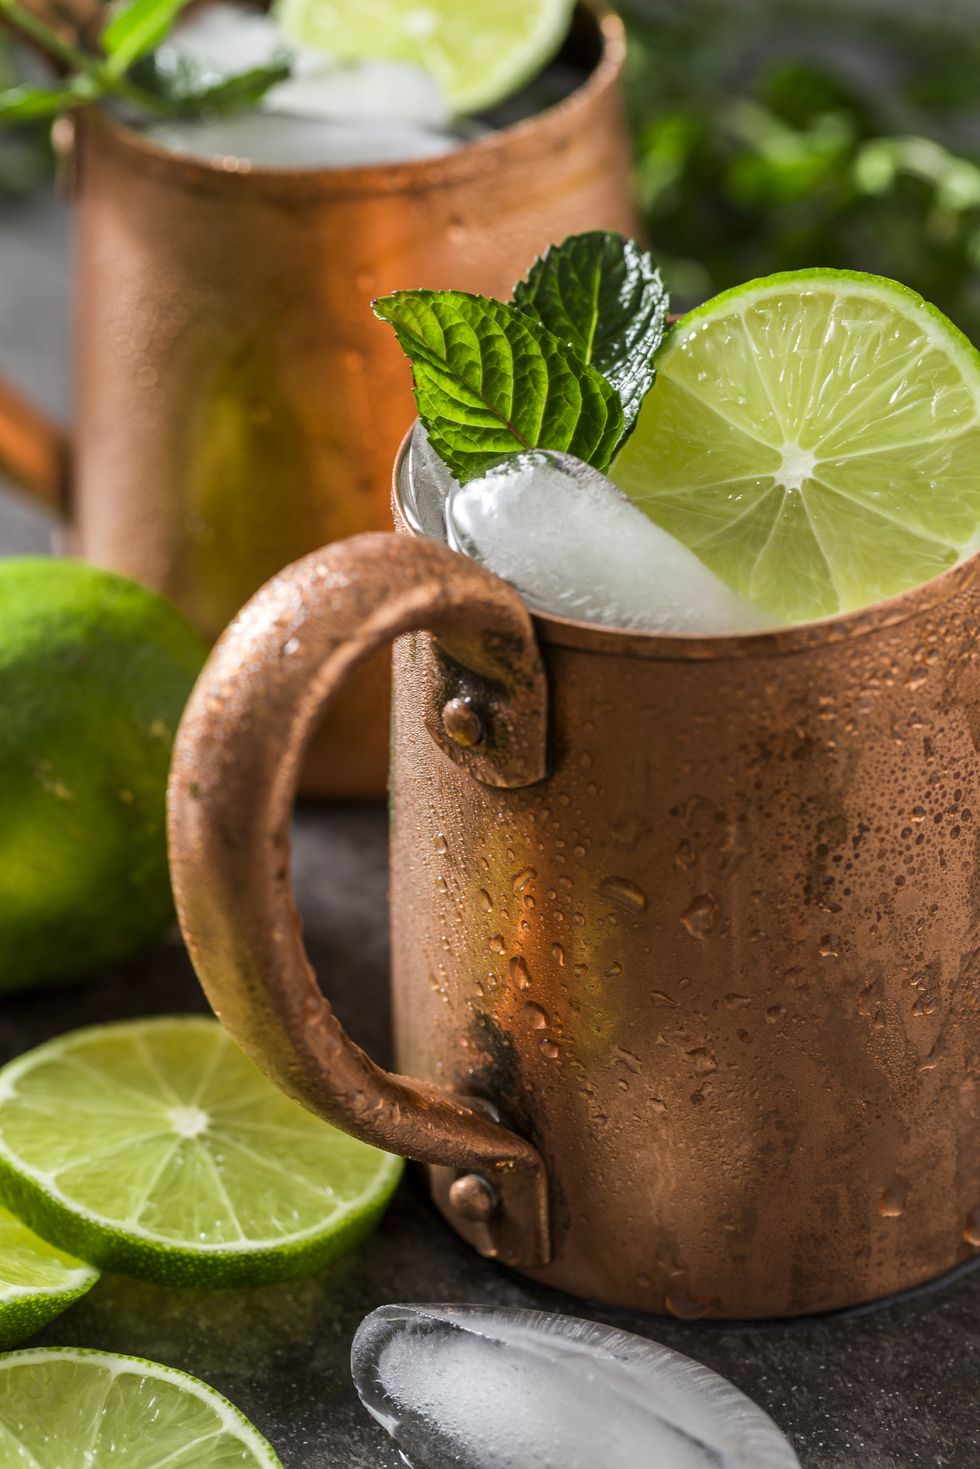 Moscow Mule Copper Mug With Lime And Mint